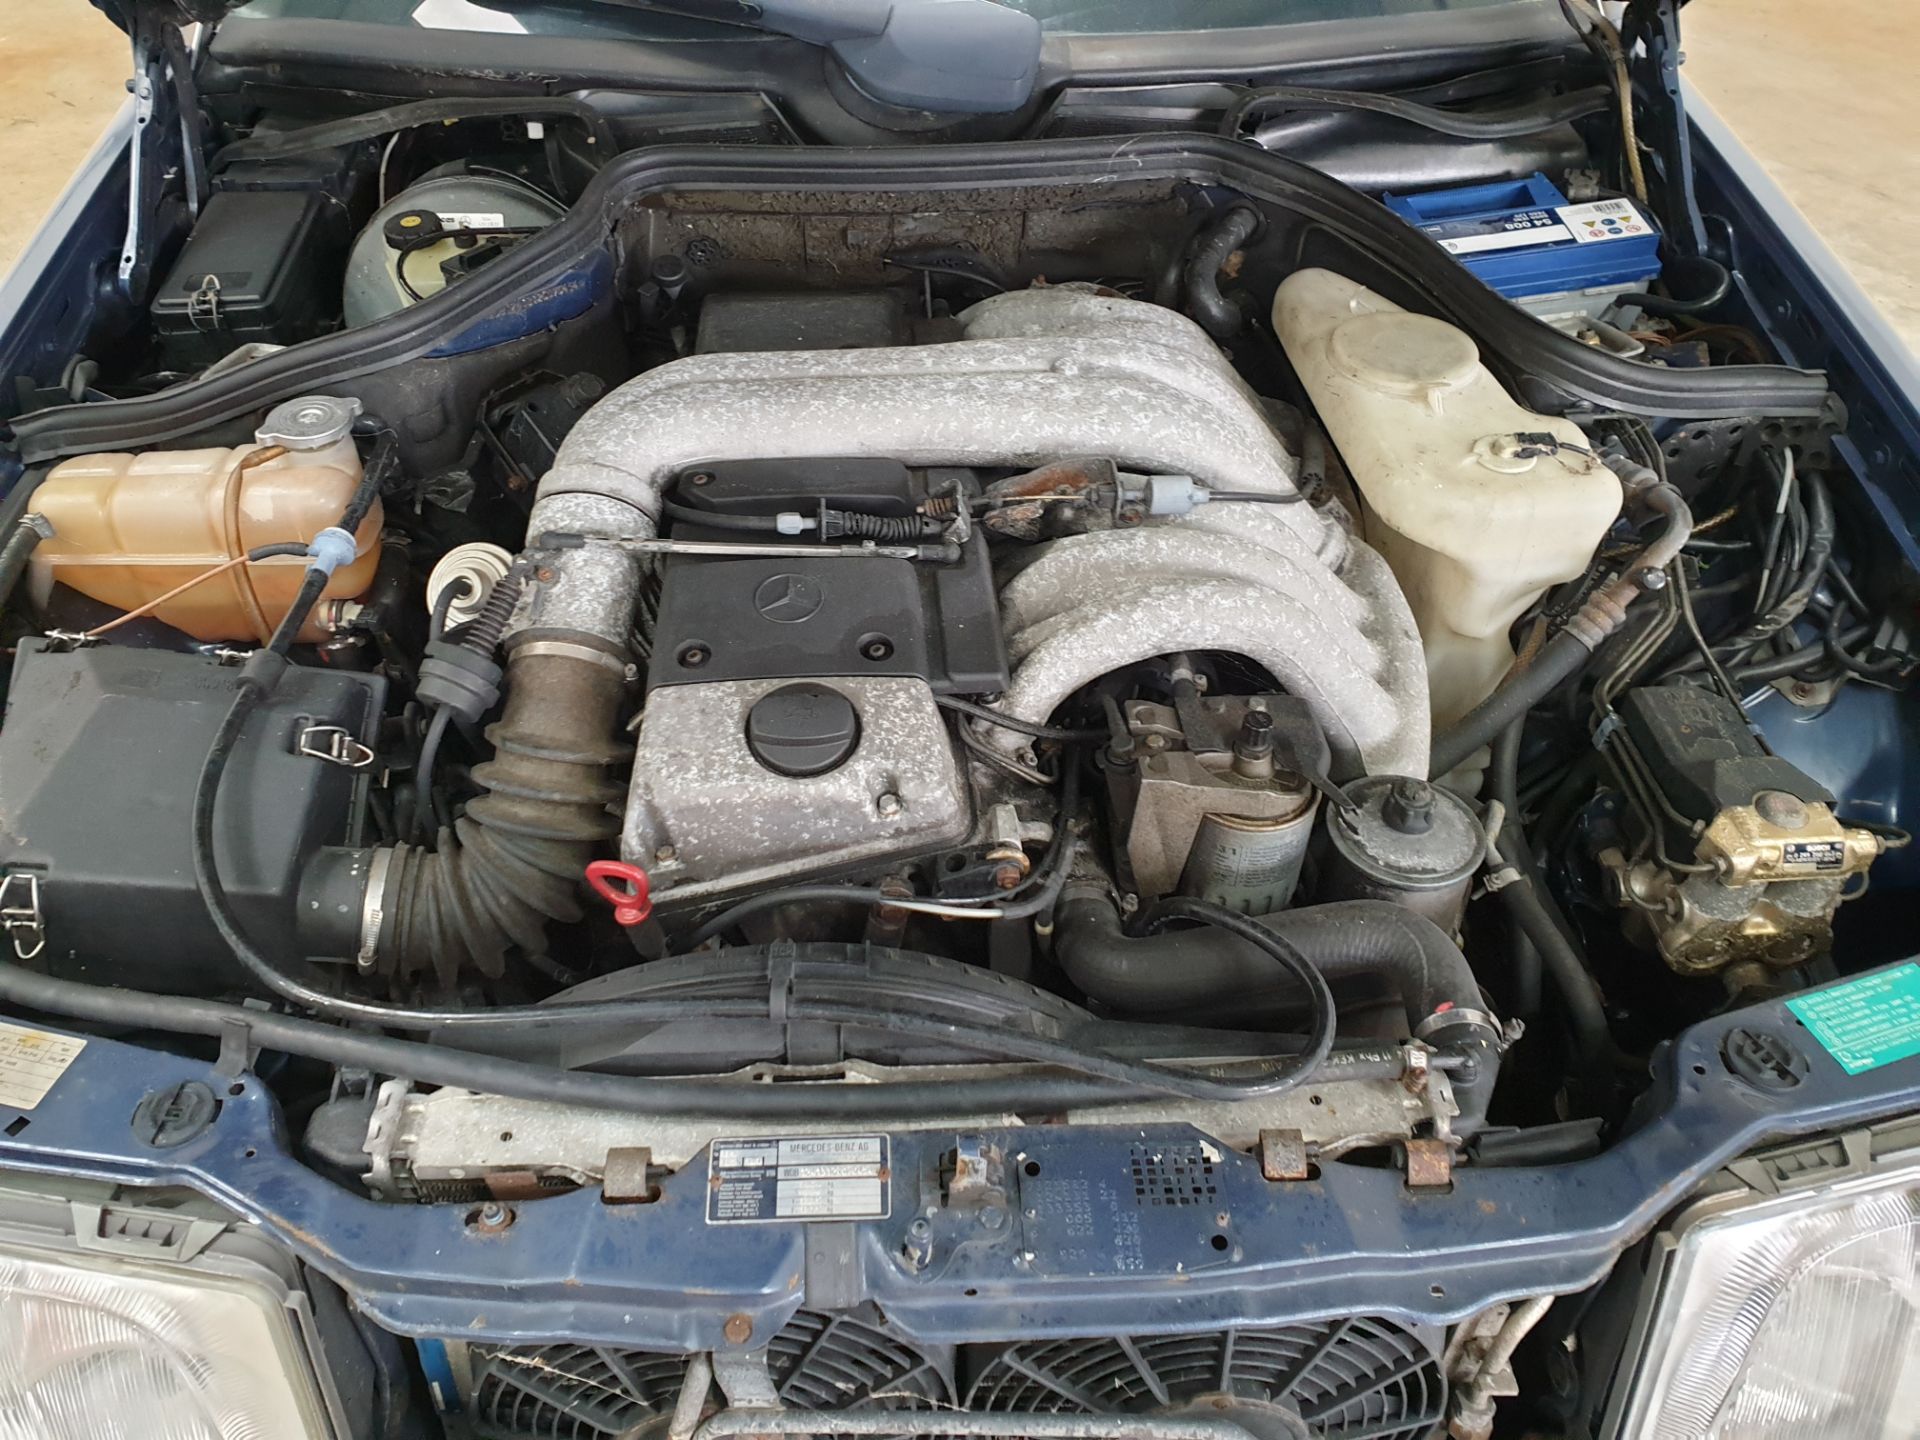 1995 Mercedes S280 - Image 14 of 14